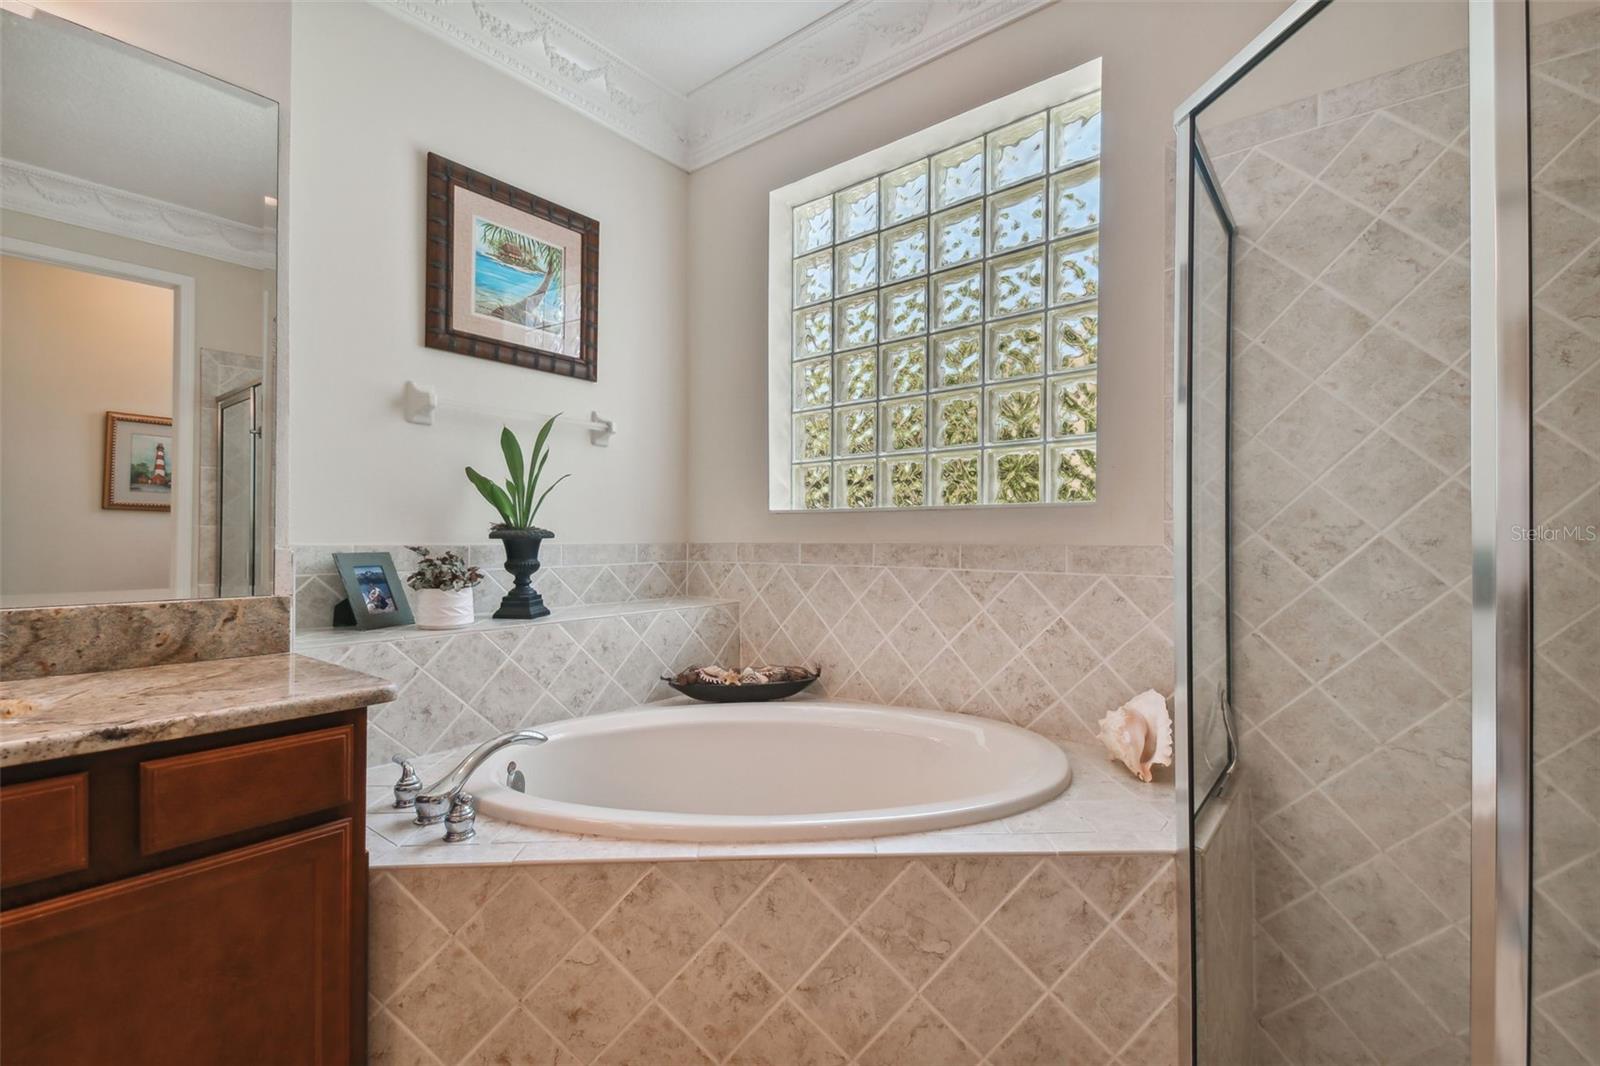 Soaking tub with upgraded fixtures